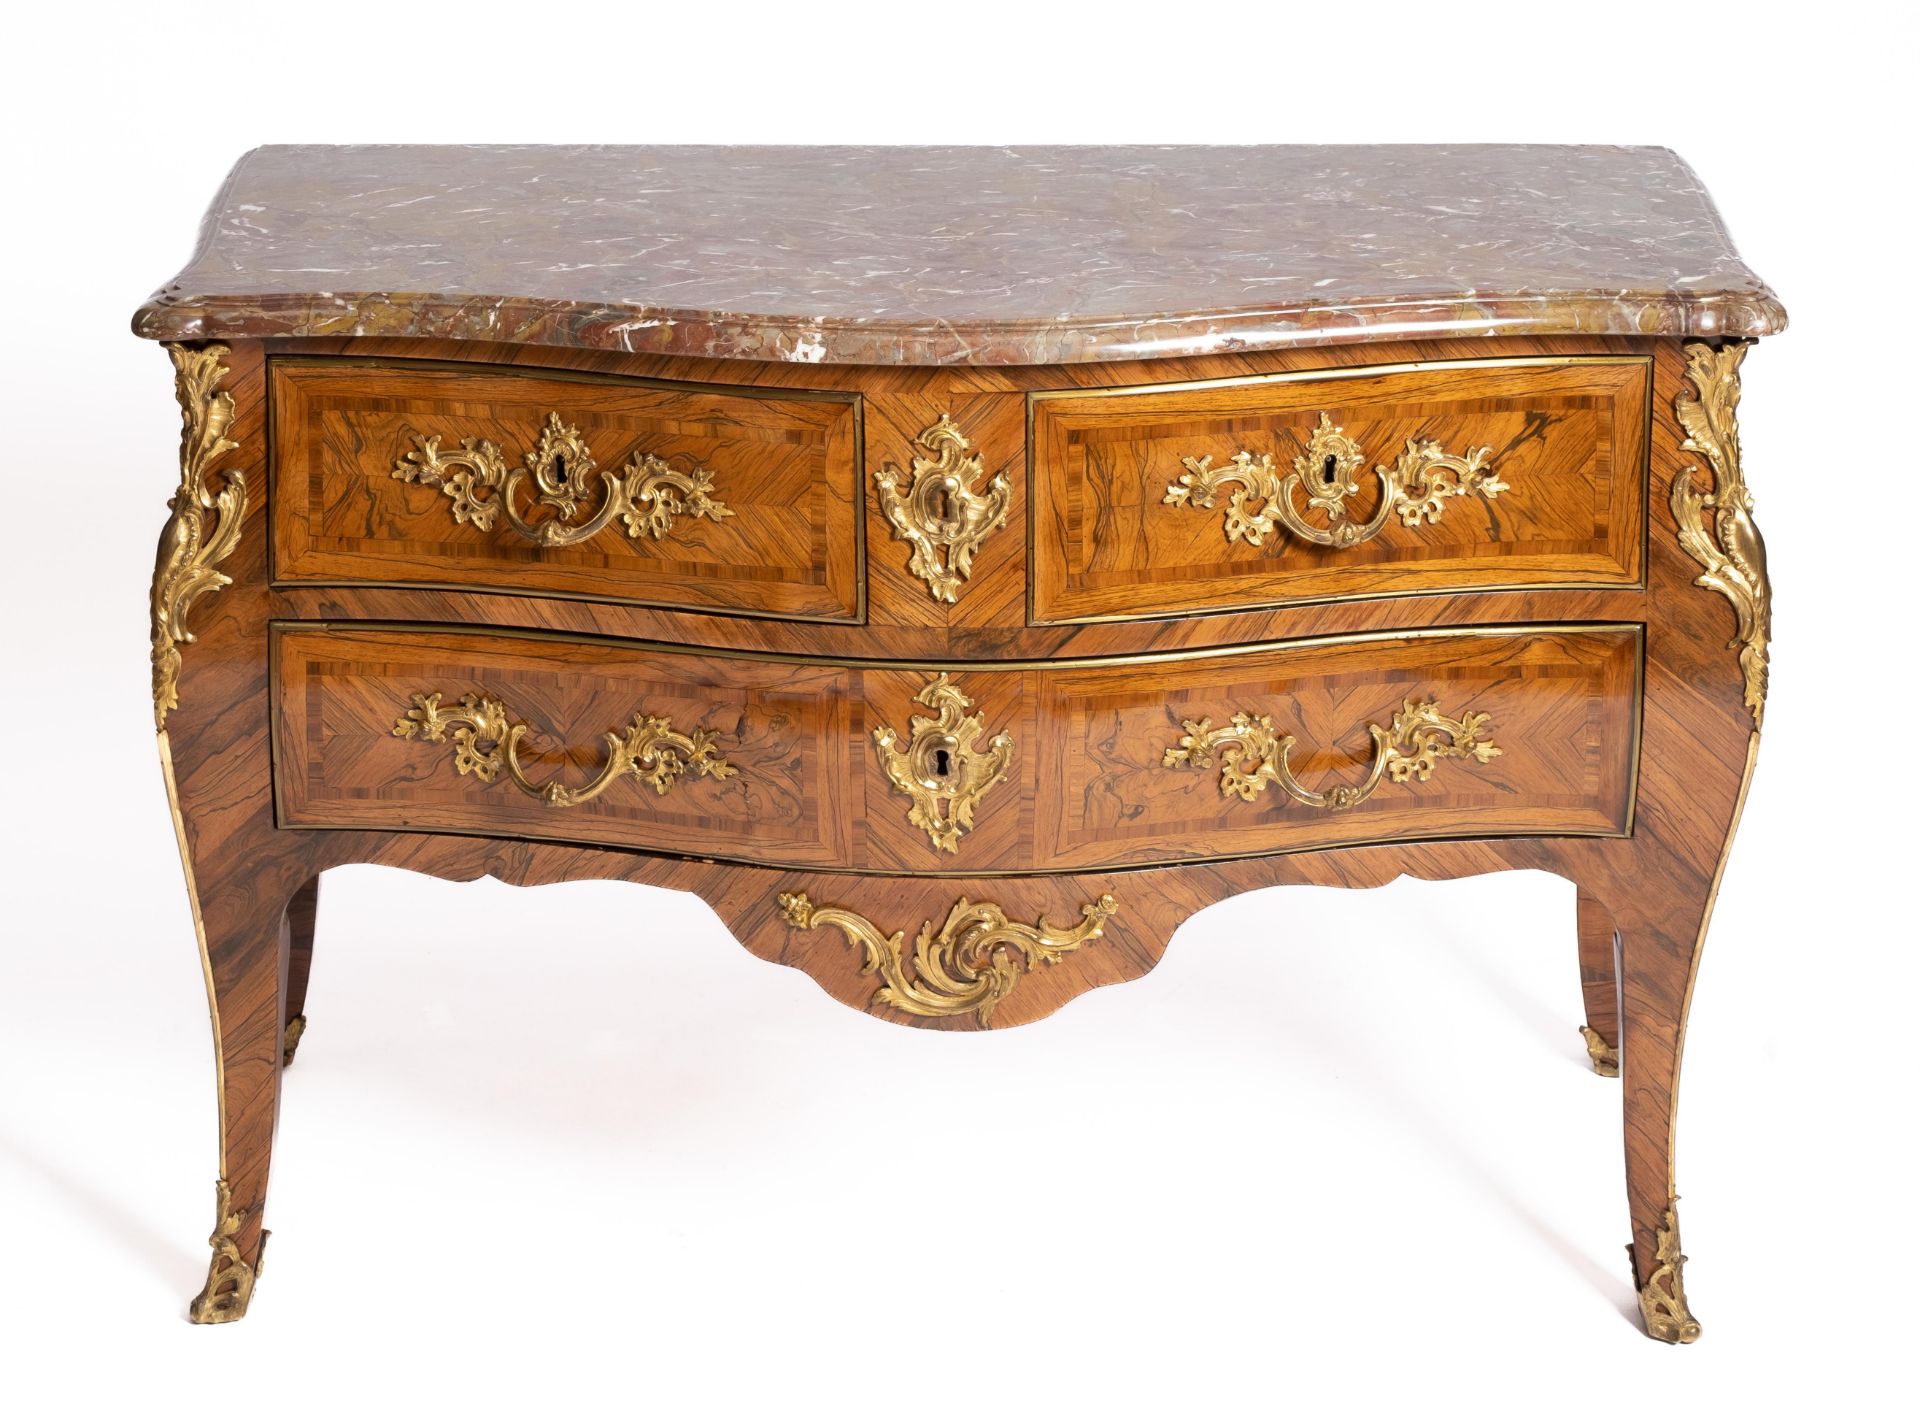 A Louis XV ormolu-mounted kingwood and fruitwood marquetry commode - Image 3 of 6